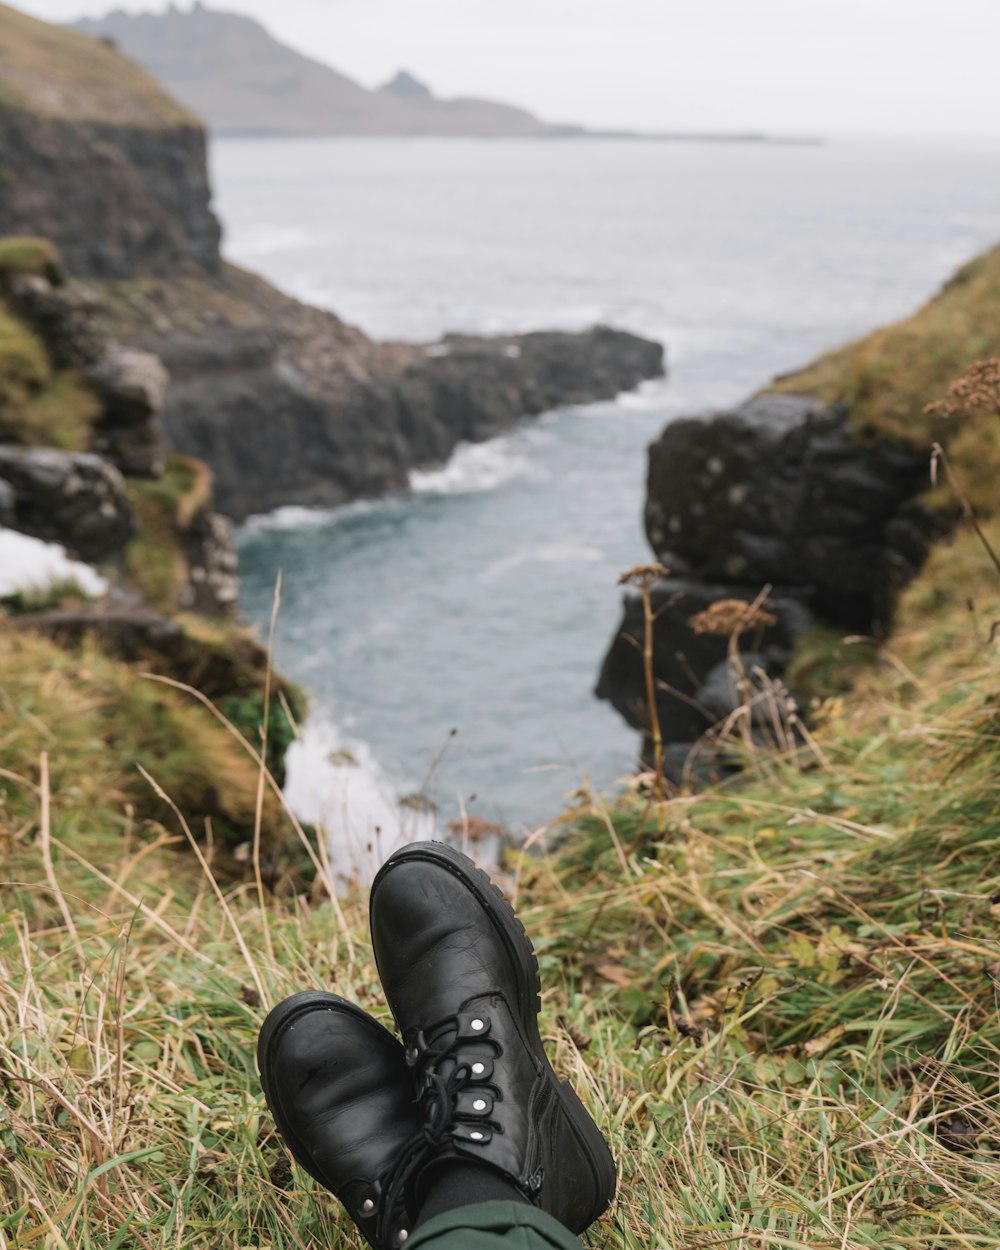 person wearing black leather shoes on brown rock near body of water during daytime